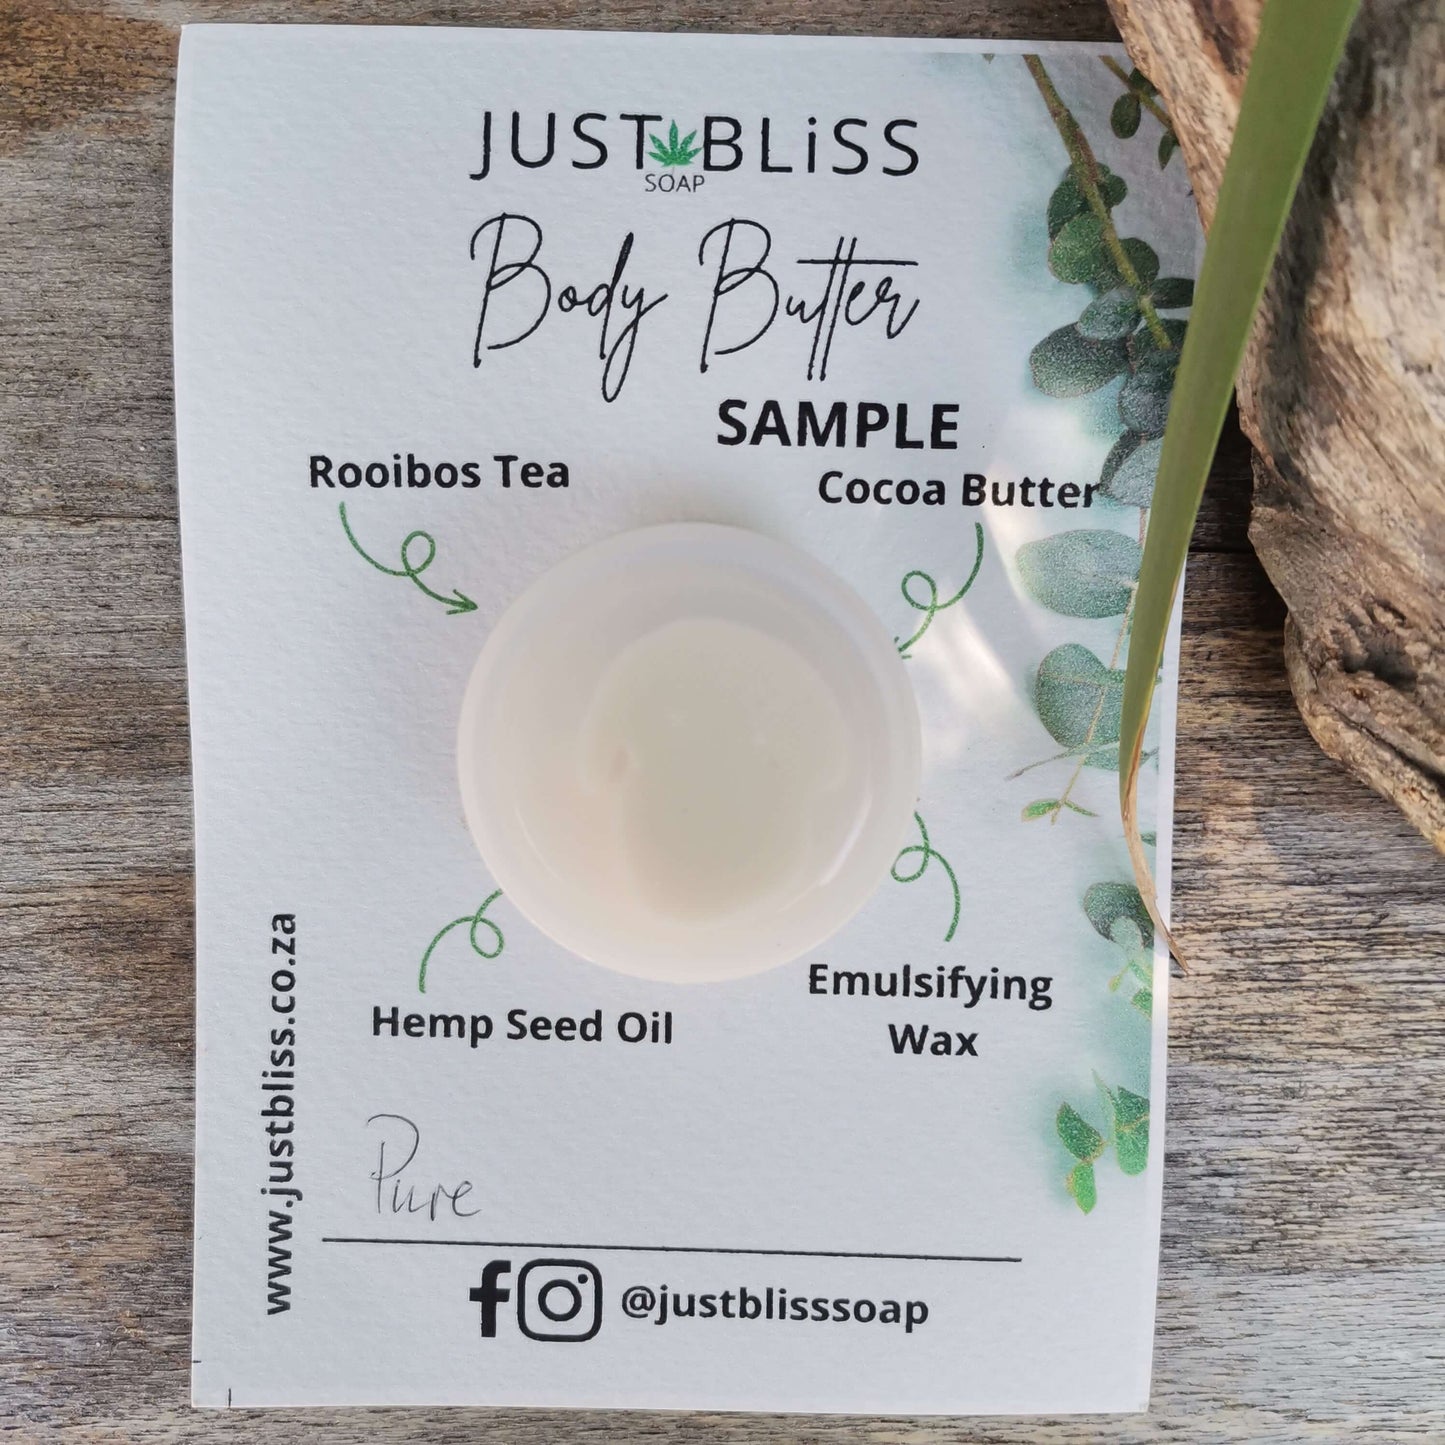 JUSTBLISS: Rooibos tea BODY BUTTER: Sample Pure - 10ml